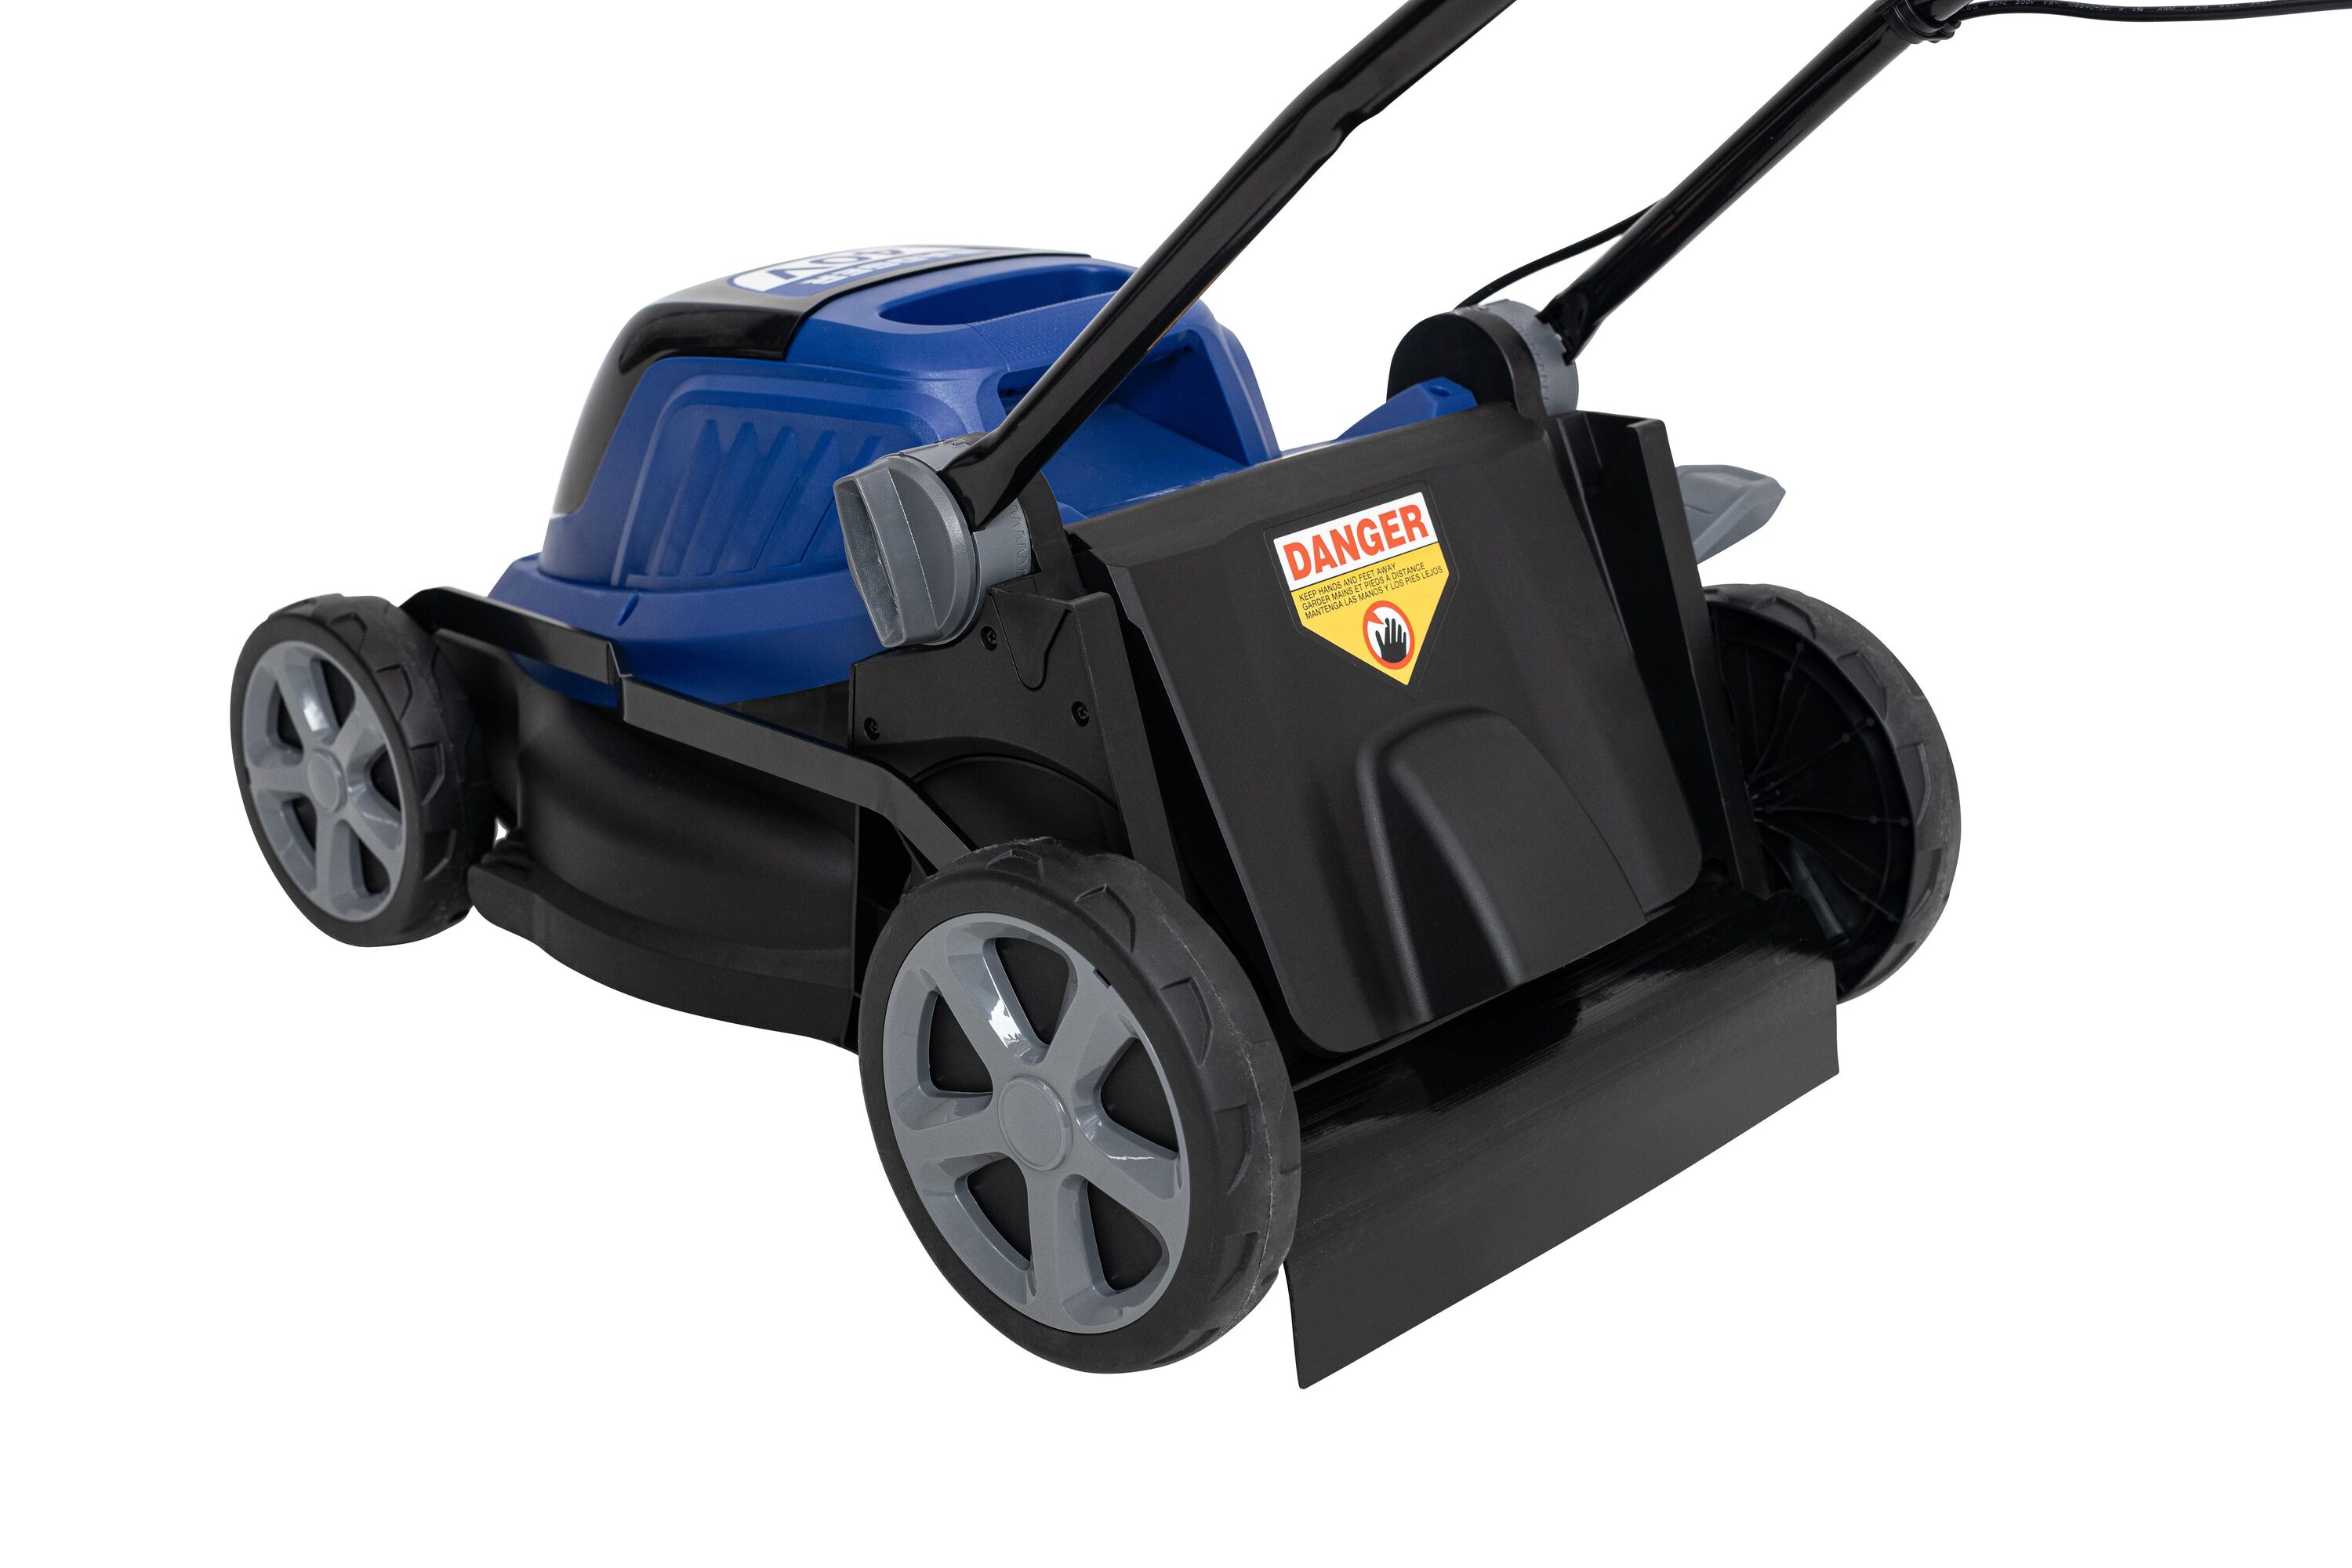 Power Lawn Mower 20 inch Genco at Rs 42000, Electric Lawn Mowers in Jammu